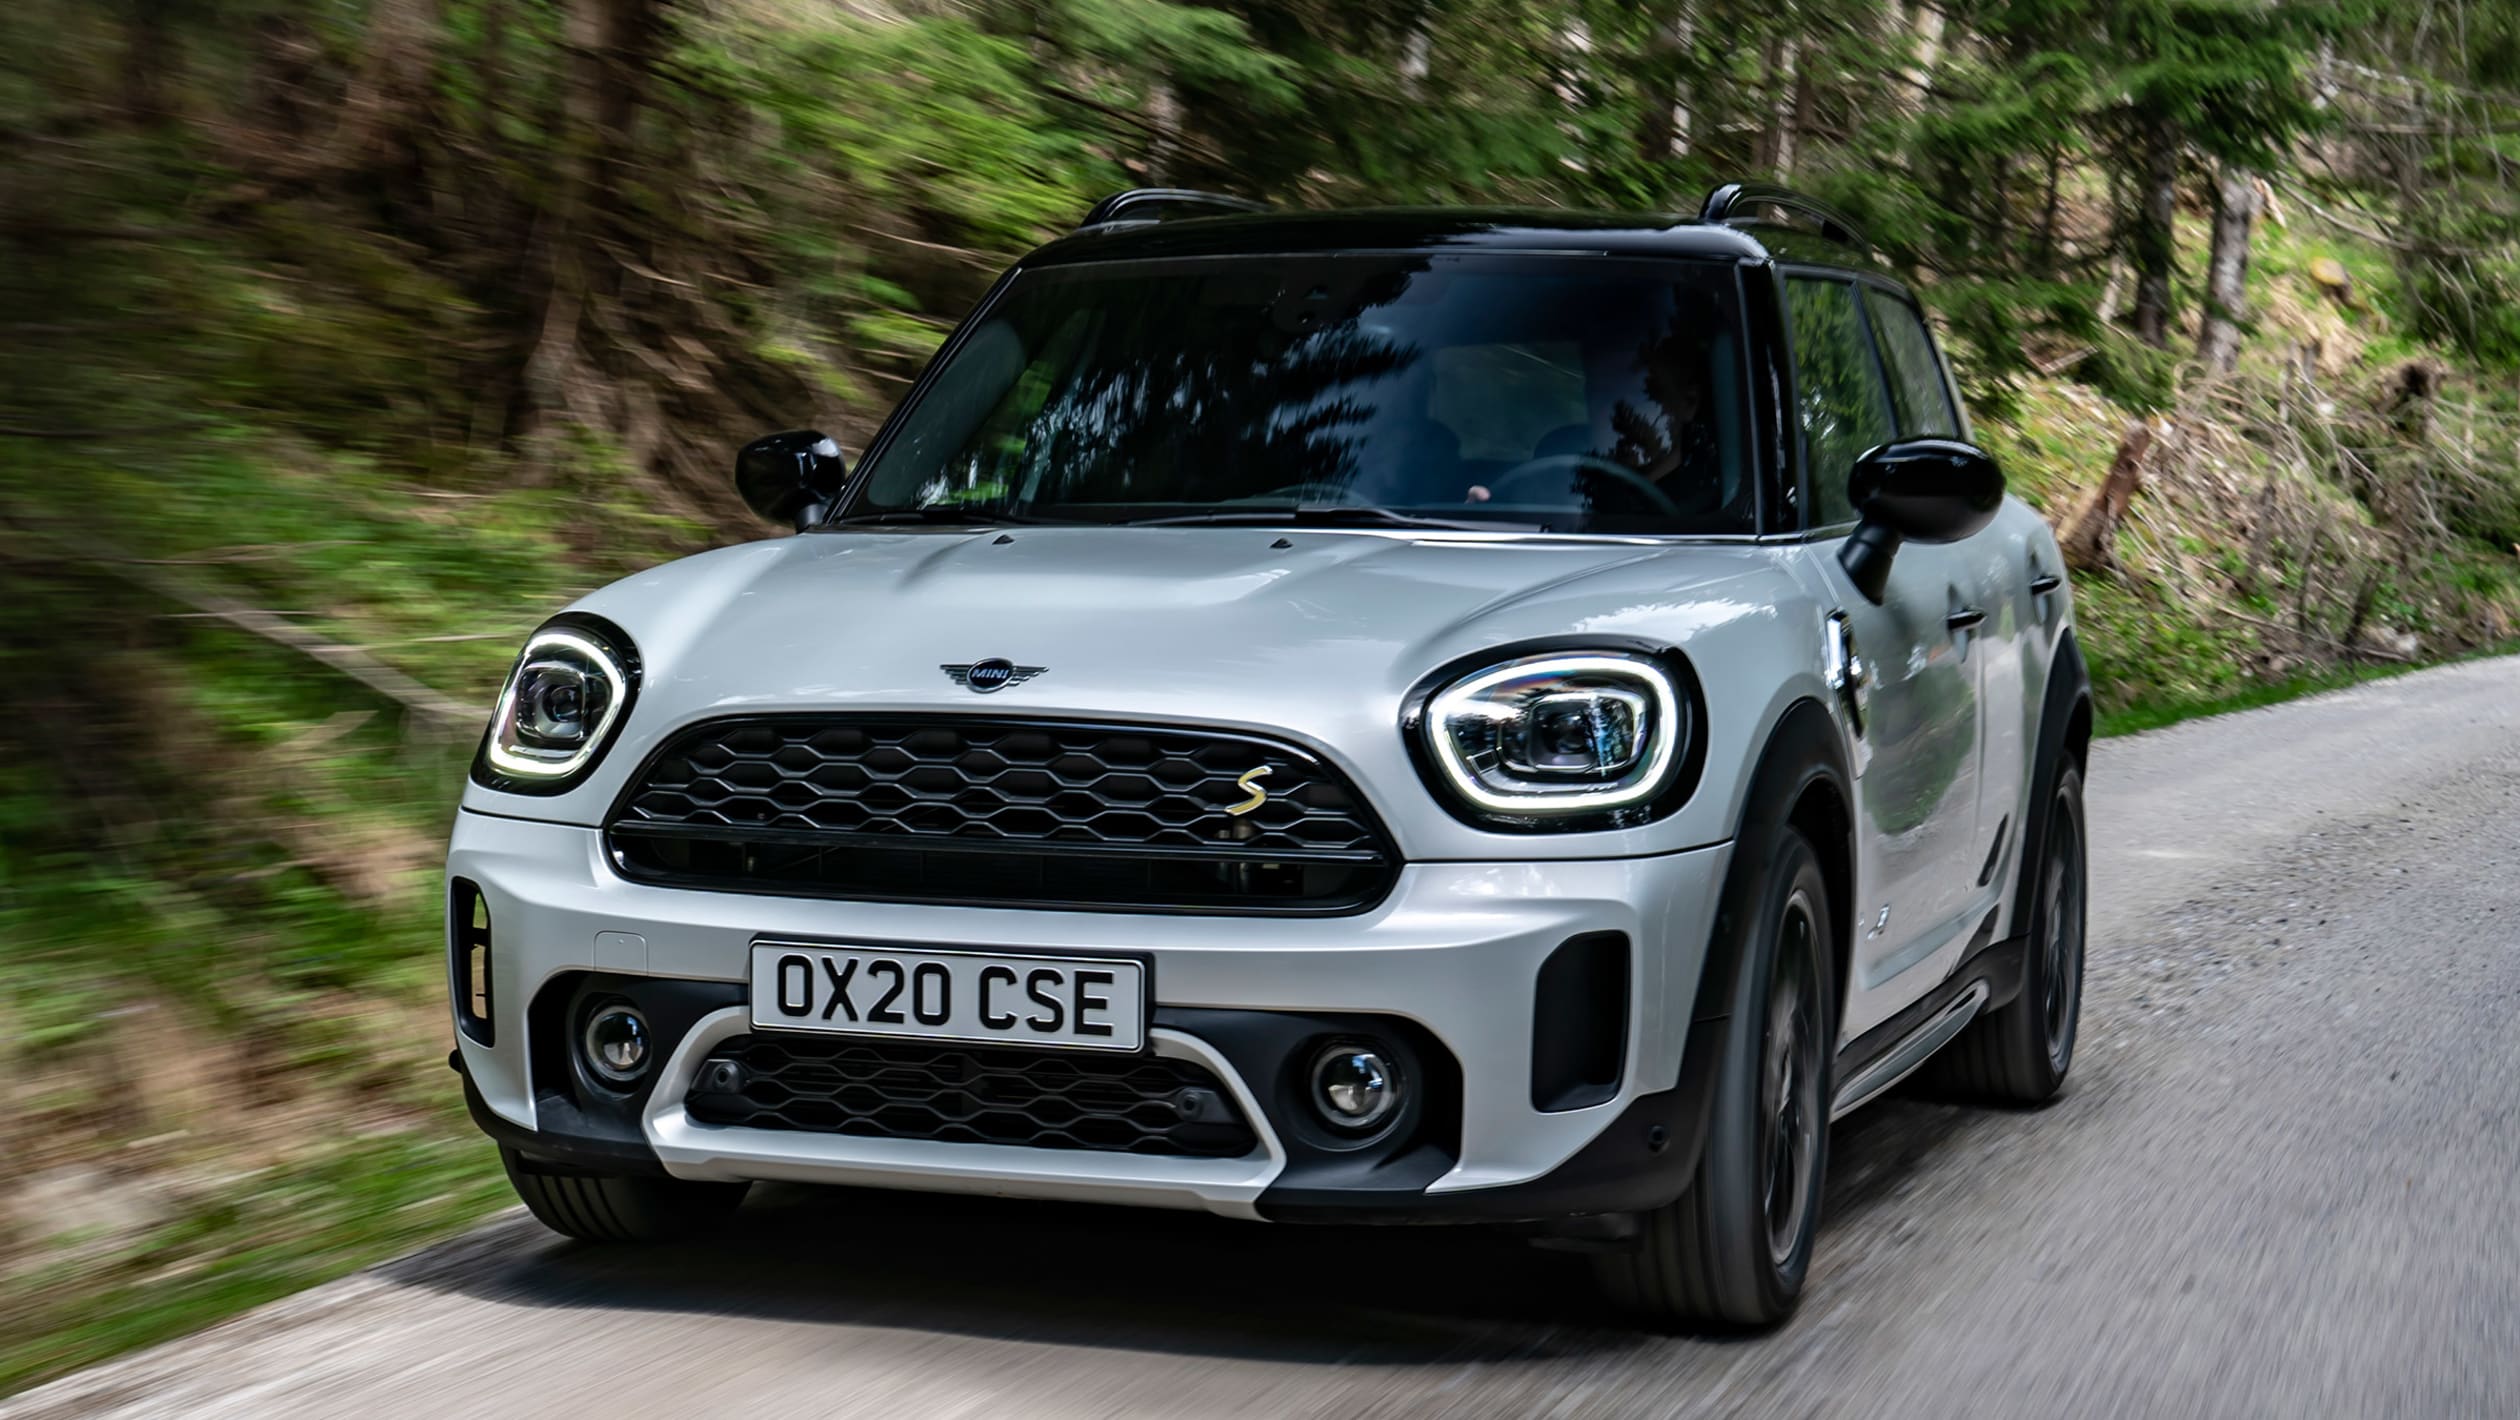 New 2020 MINI Countryman facelift revealed with new engines - pictures ...